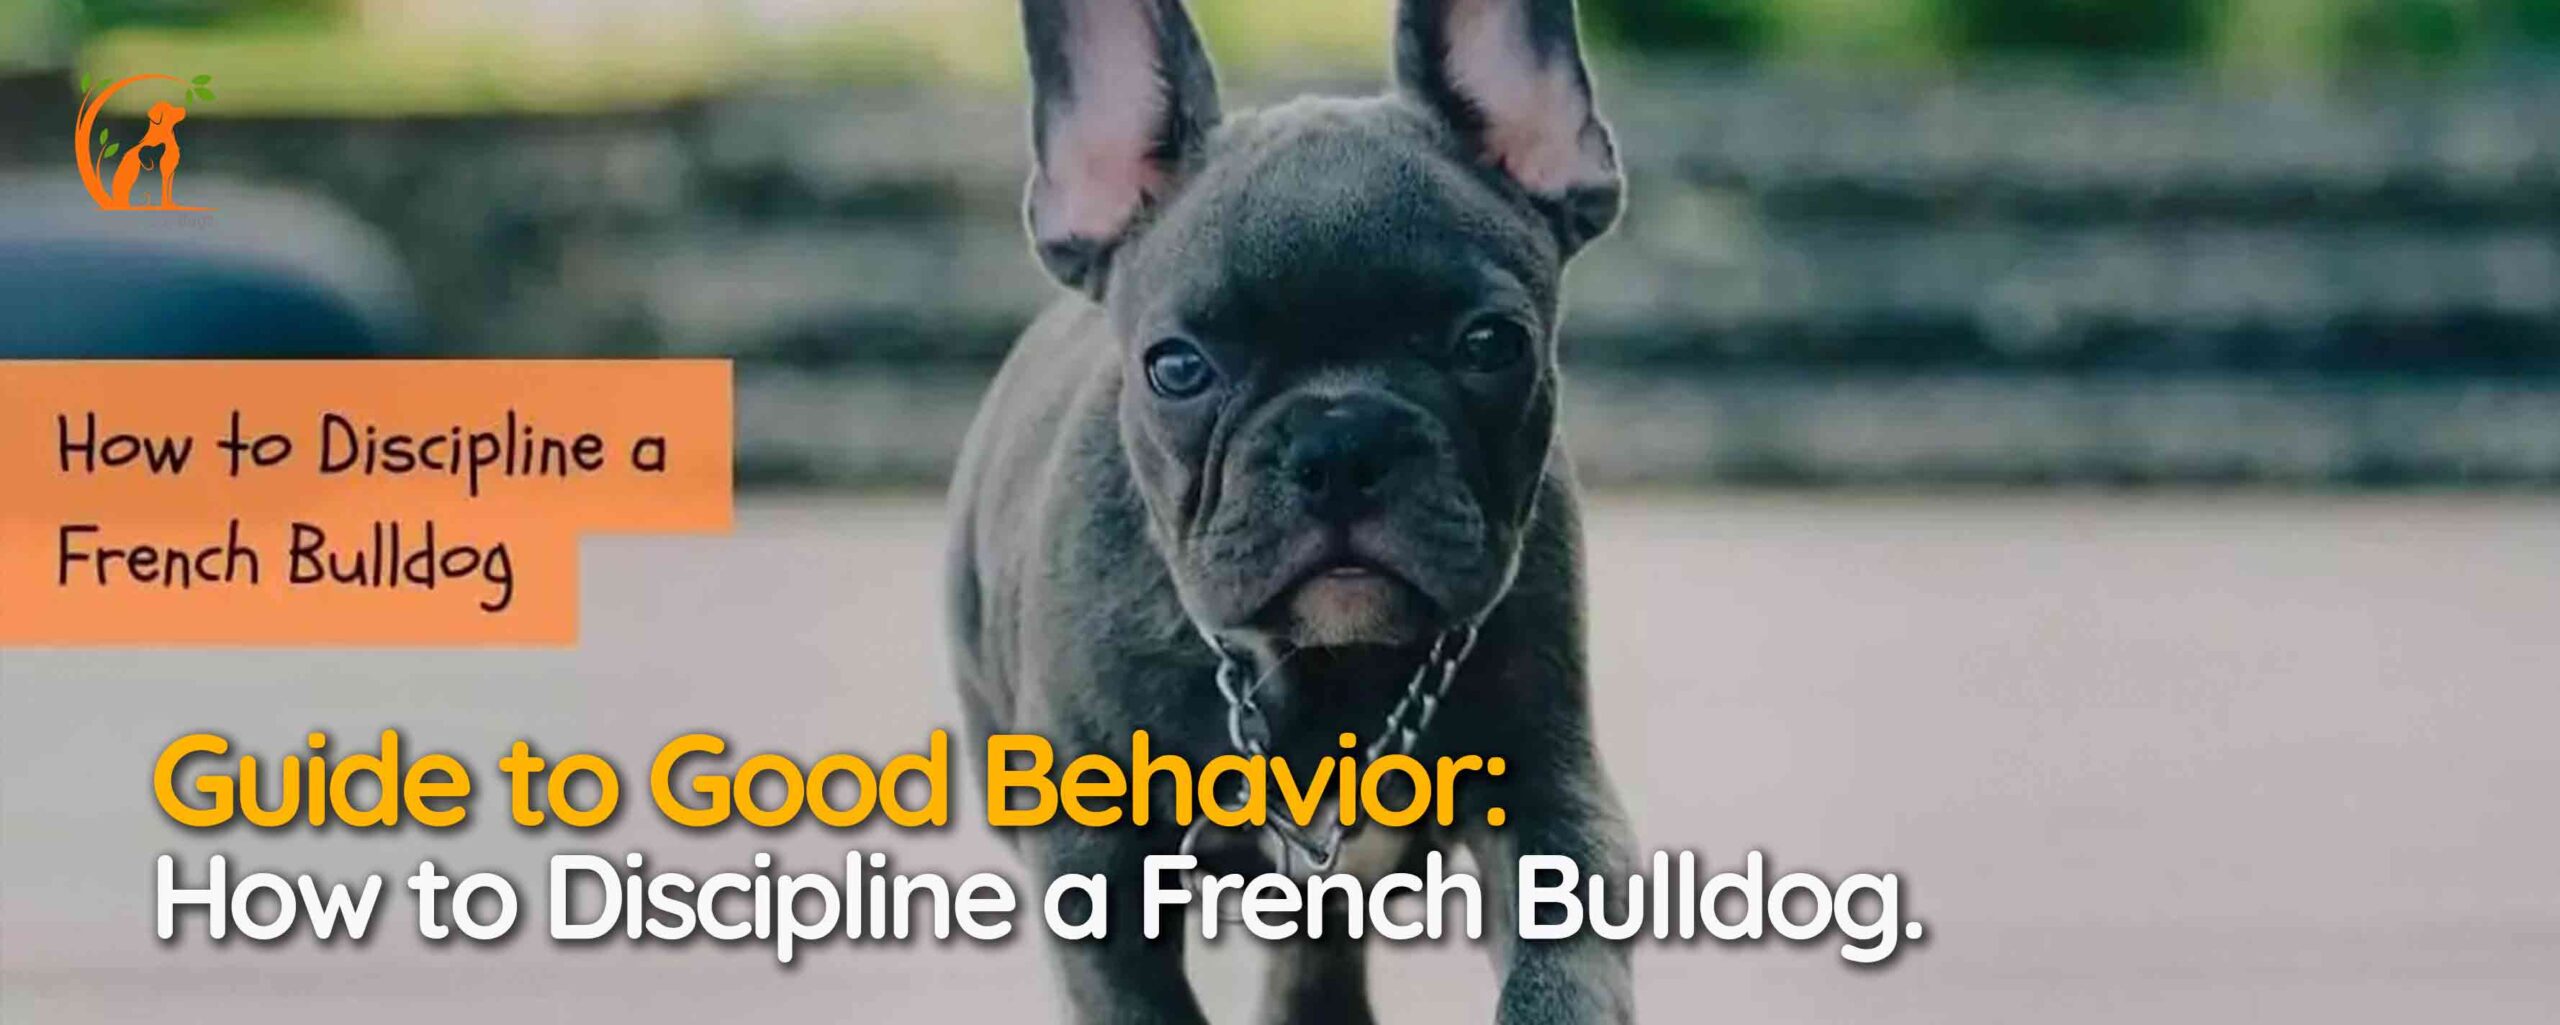 Guide to Good Behavior: How to Discipline a French Bulldog.